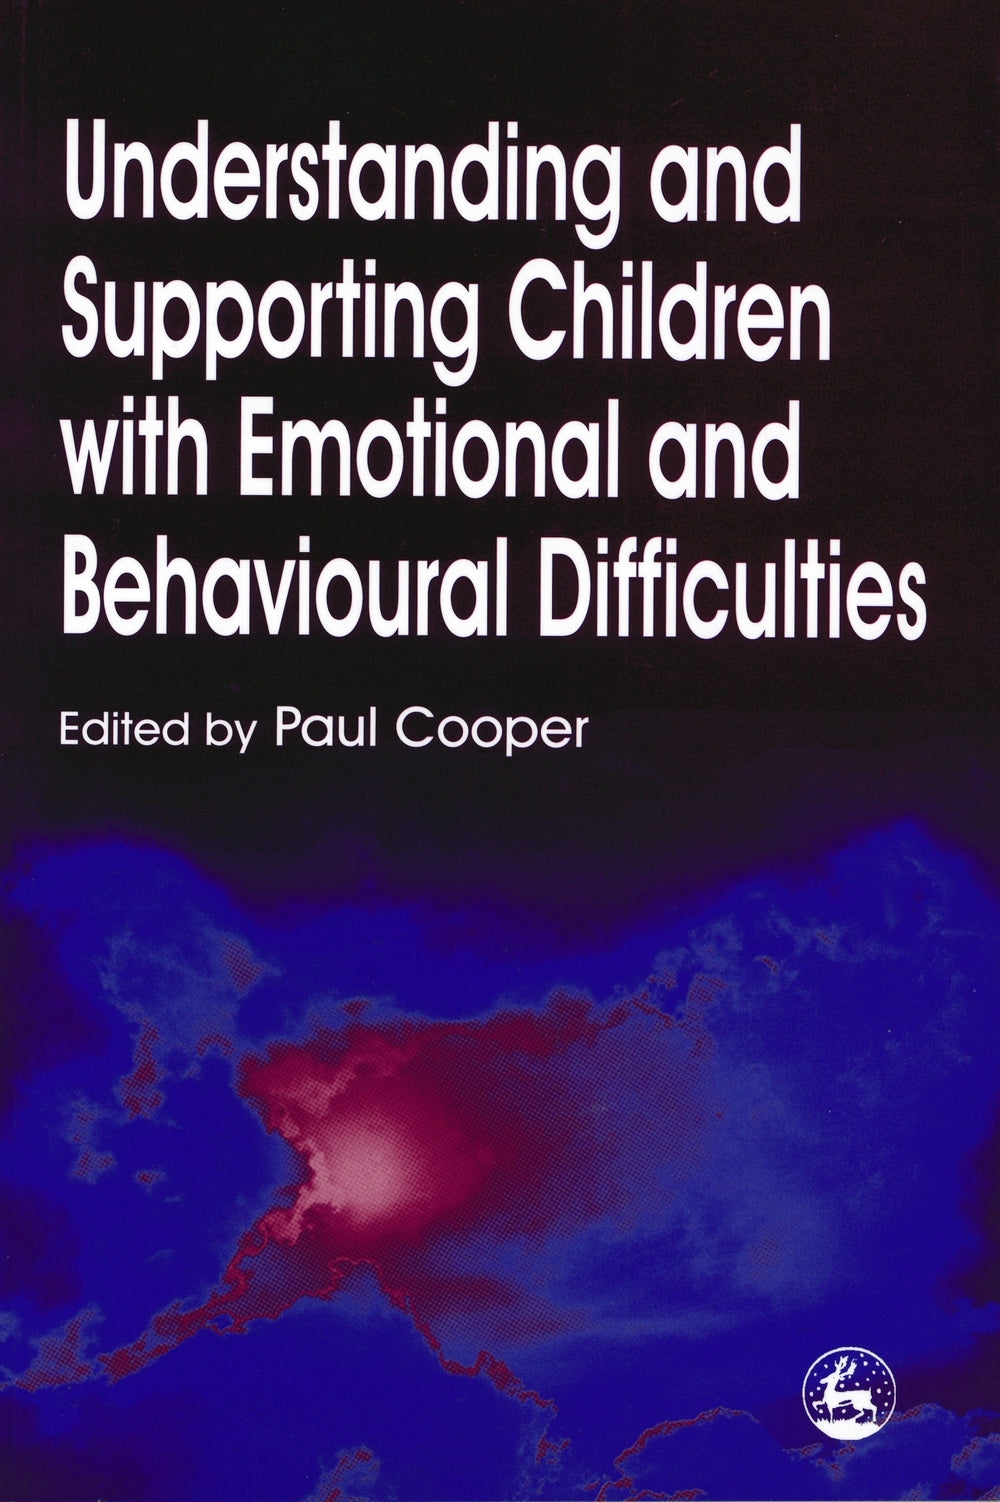 Understanding and Supporting Children with Emotional and Behavioural Difficulties by Paul Cooper, No Author Listed